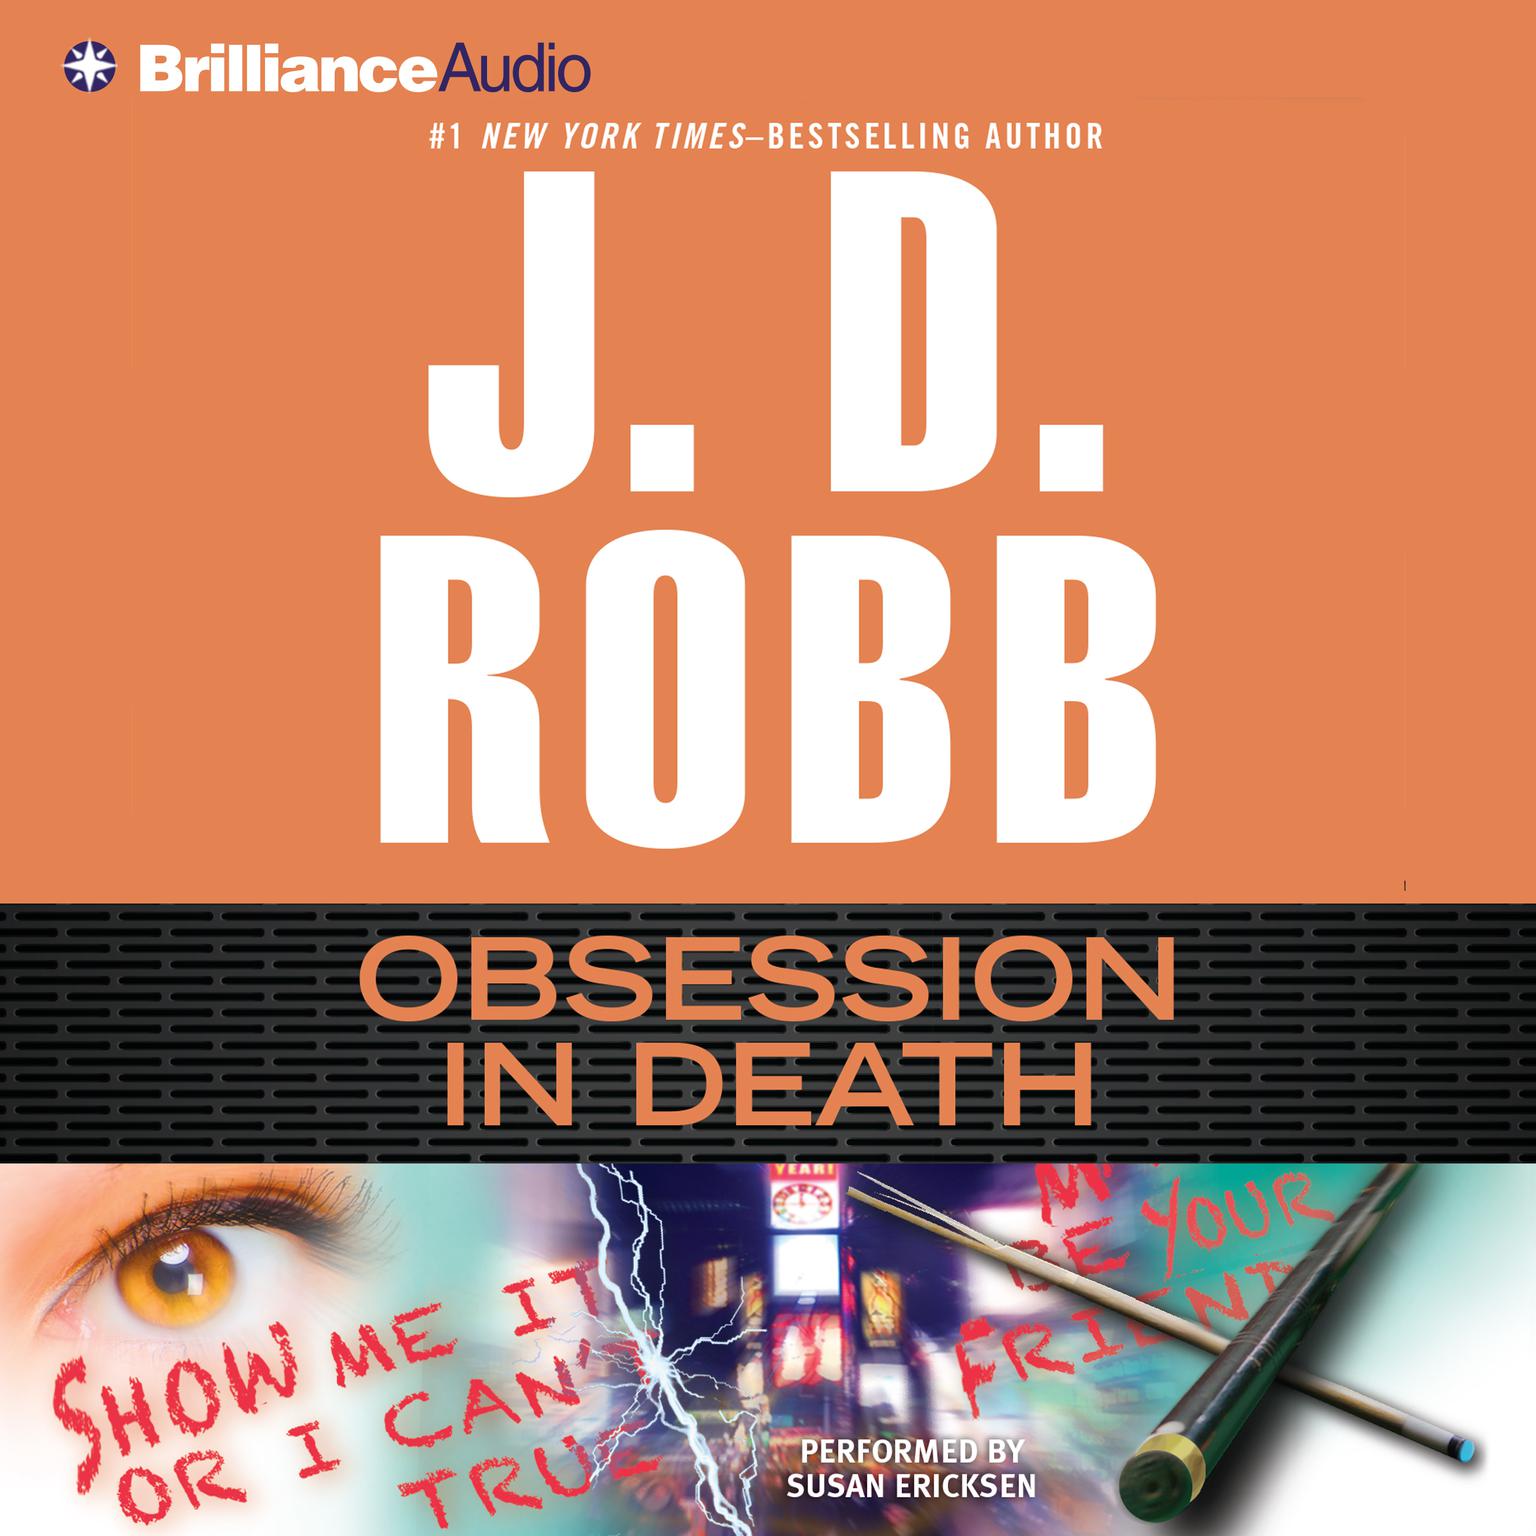 Obsession in Death (Abridged) Audiobook, by J. D. Robb